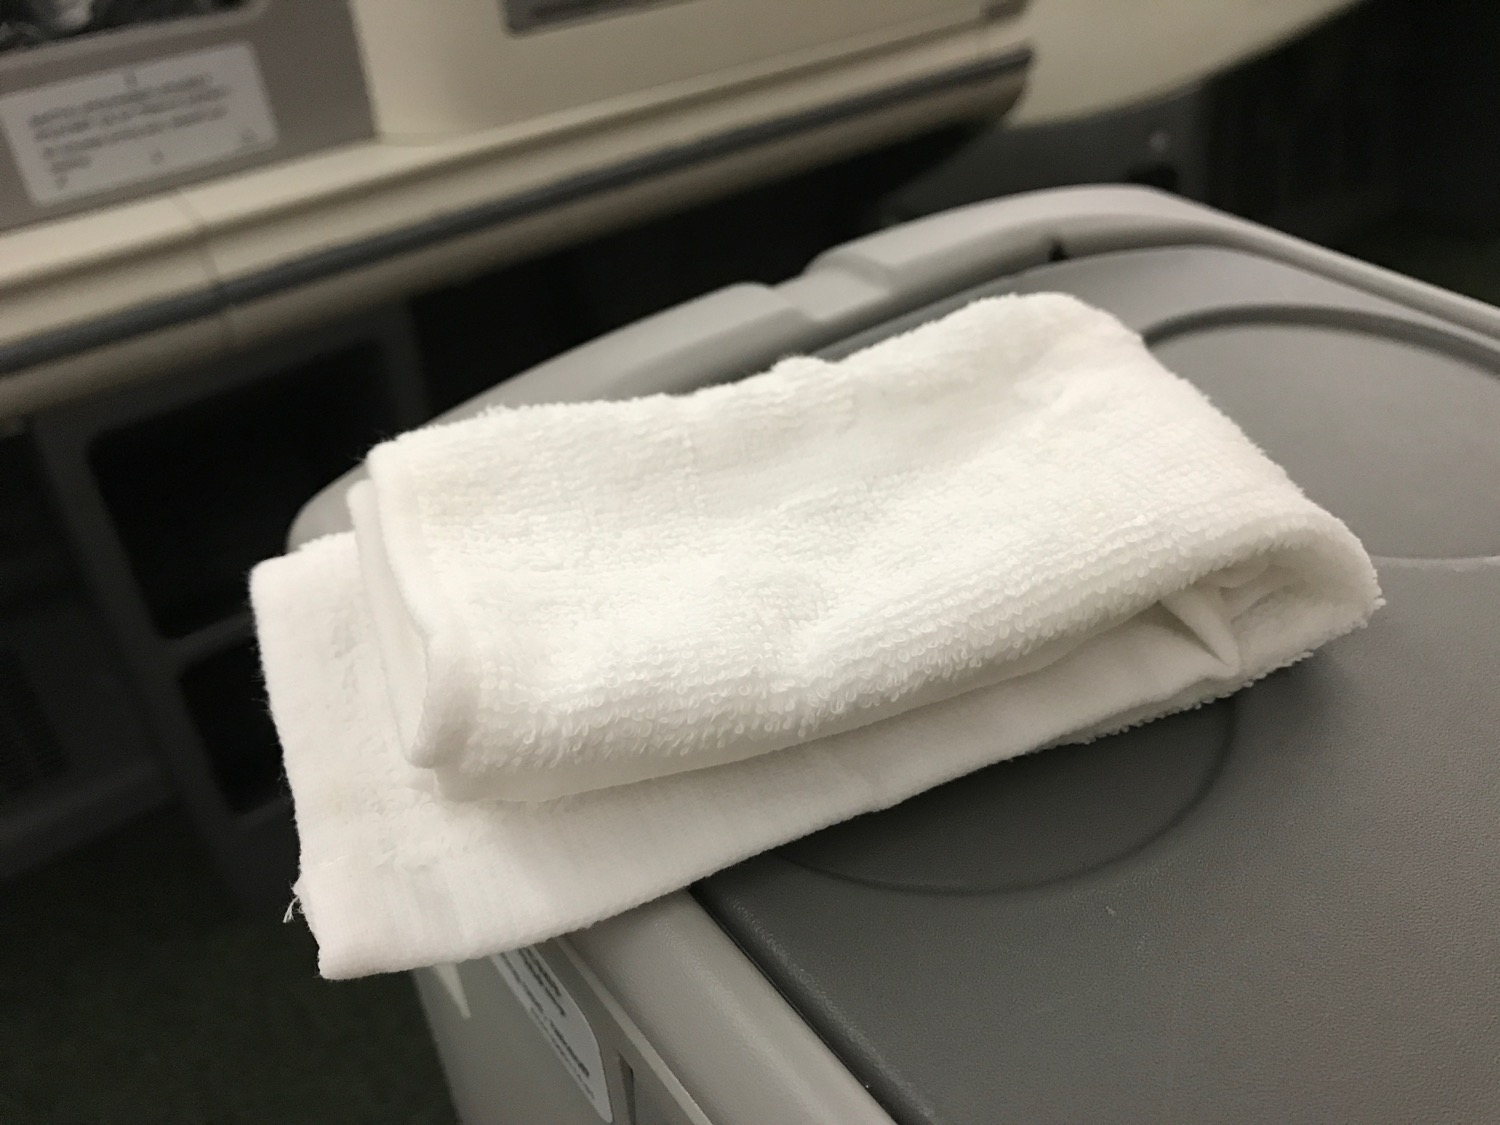 a white towel on a grey surface